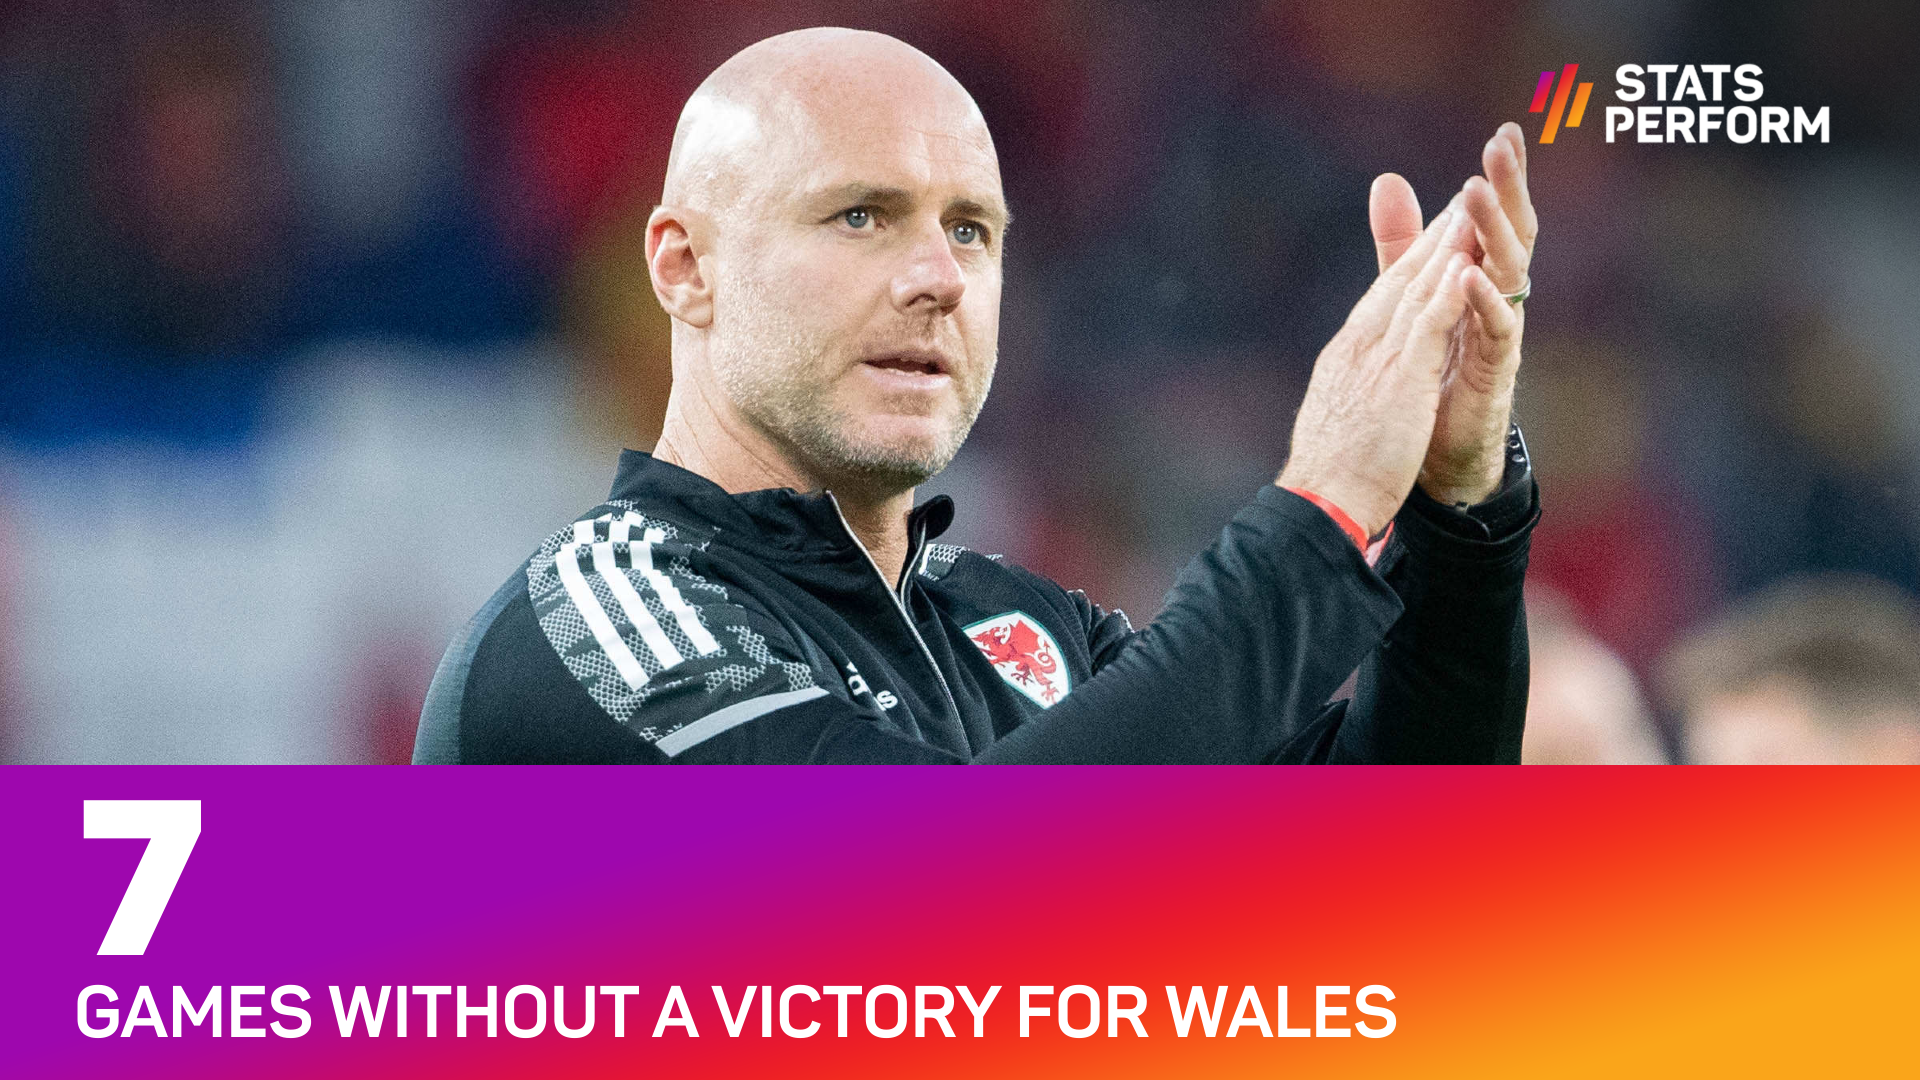 Wales are winless in seven matches